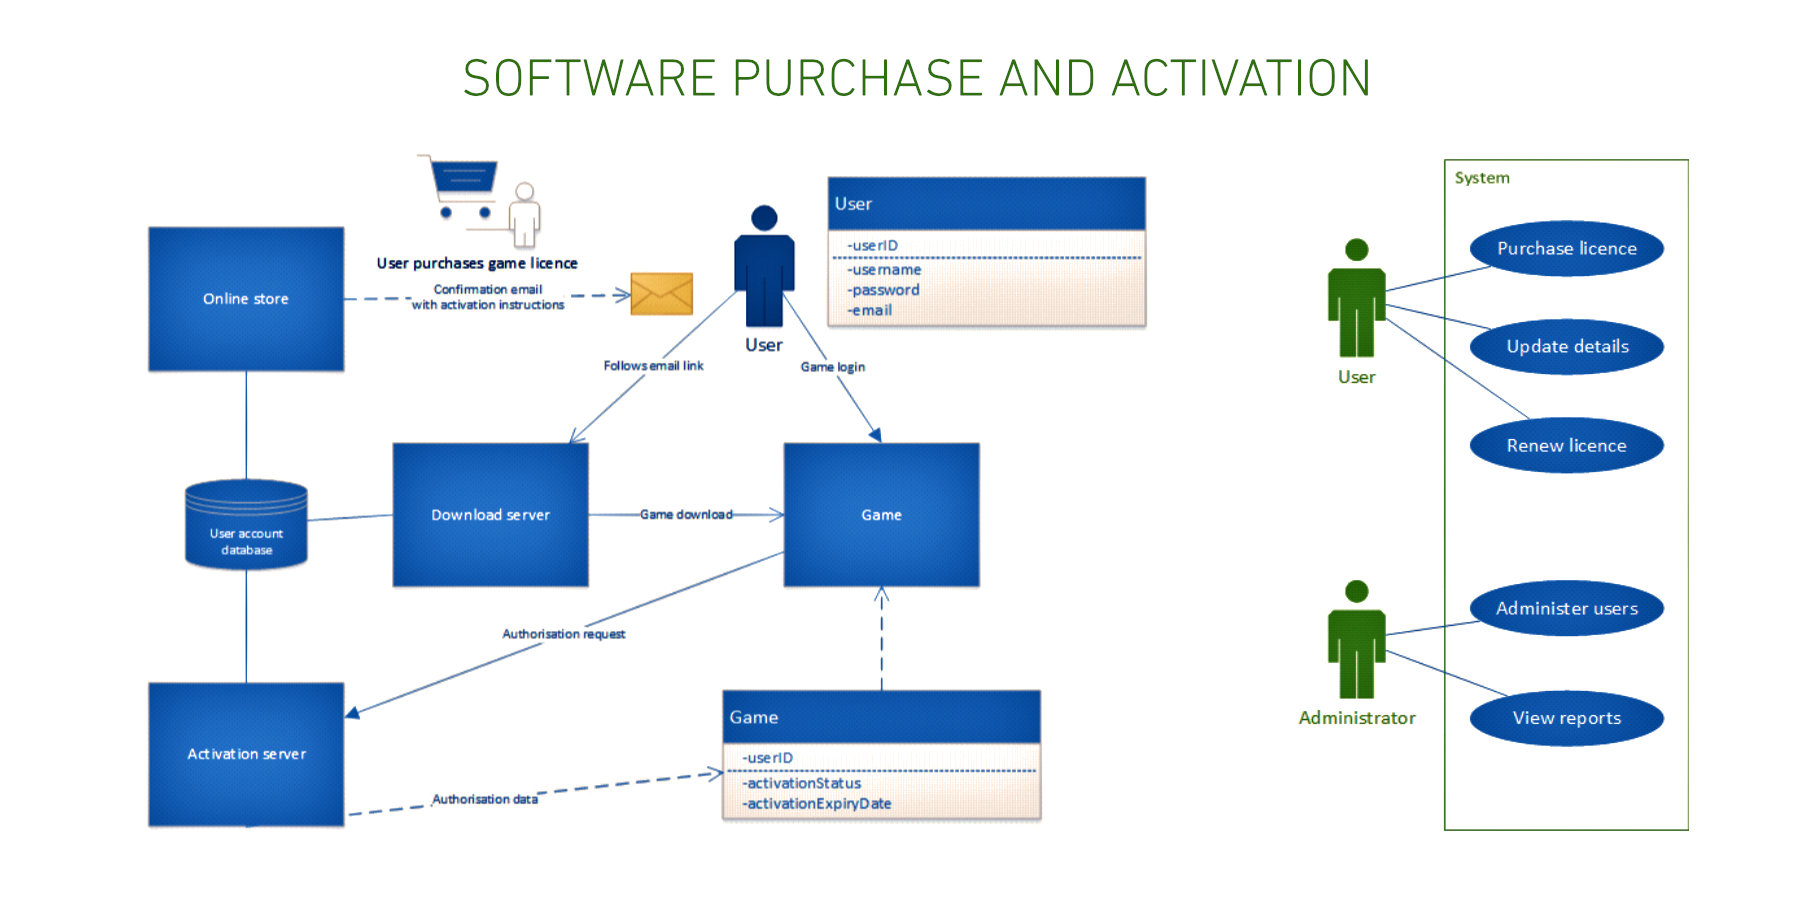 Software purchase and activation process